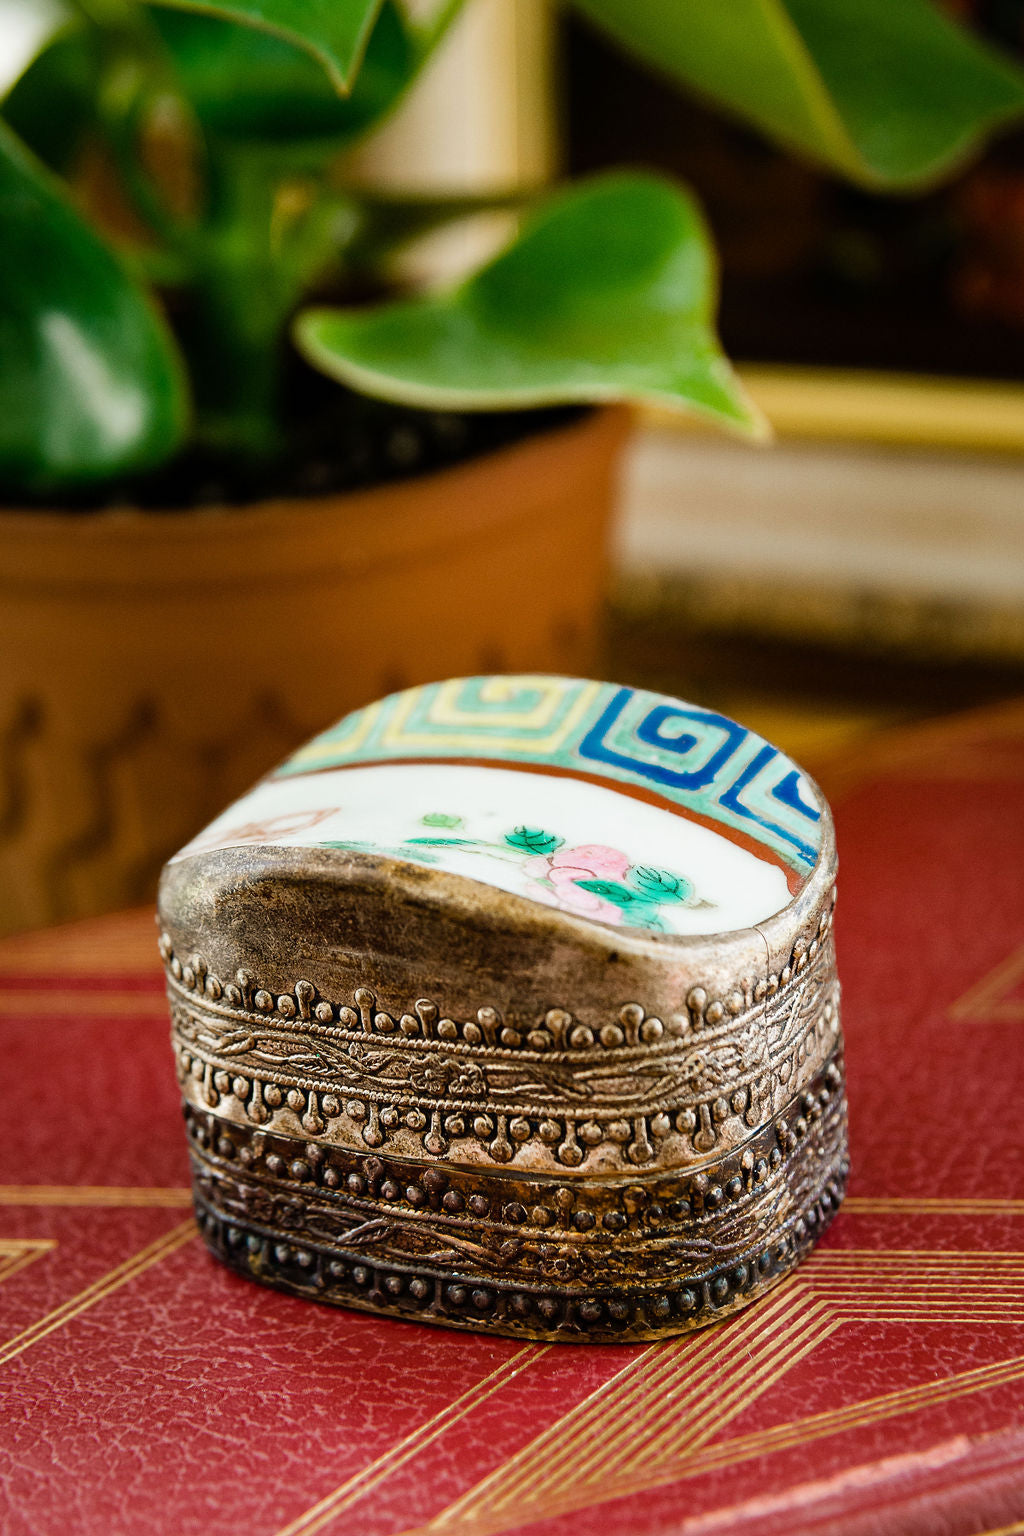 unique vessel antique relic shard box Chinese pottery art porcelain cloisonne vintage rare match holder special gift ethical home decor recycled reuse repurpose eco friendly heirloom